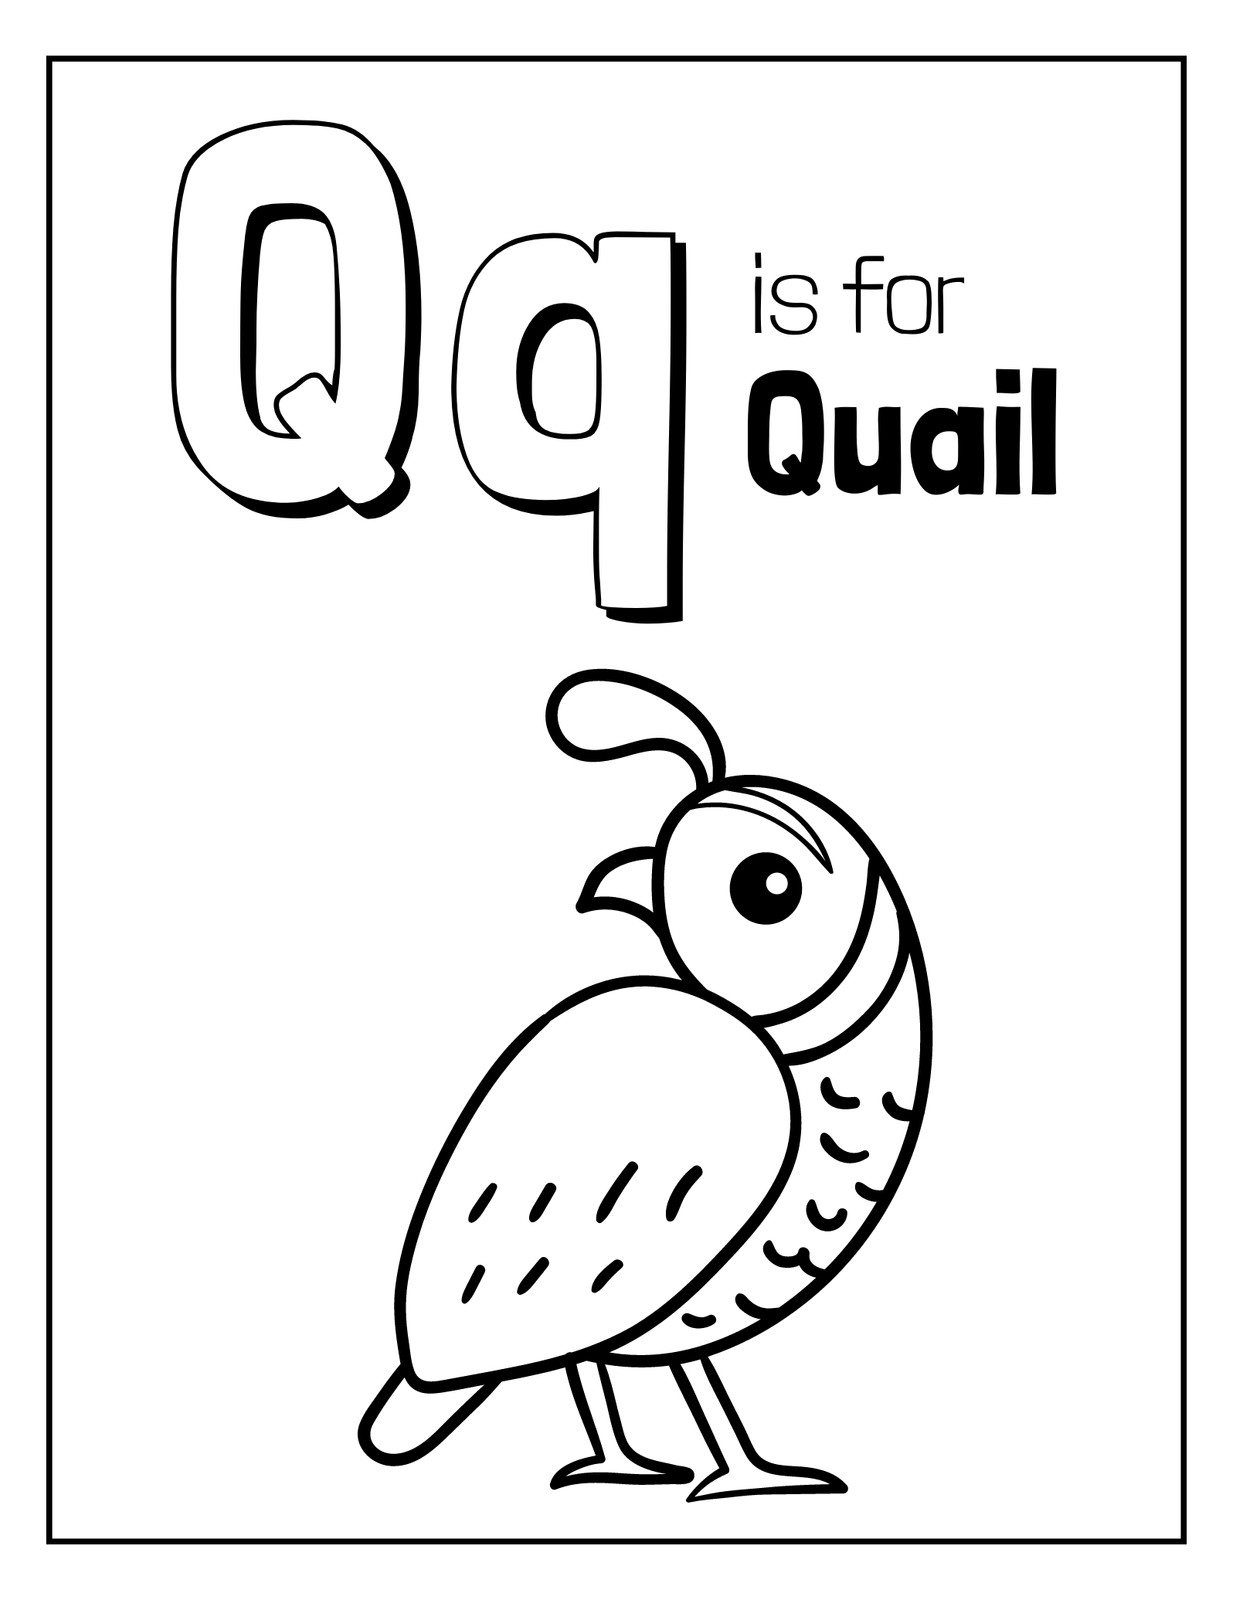 Page 7 - Free printable coloring page templates to customize | Canva